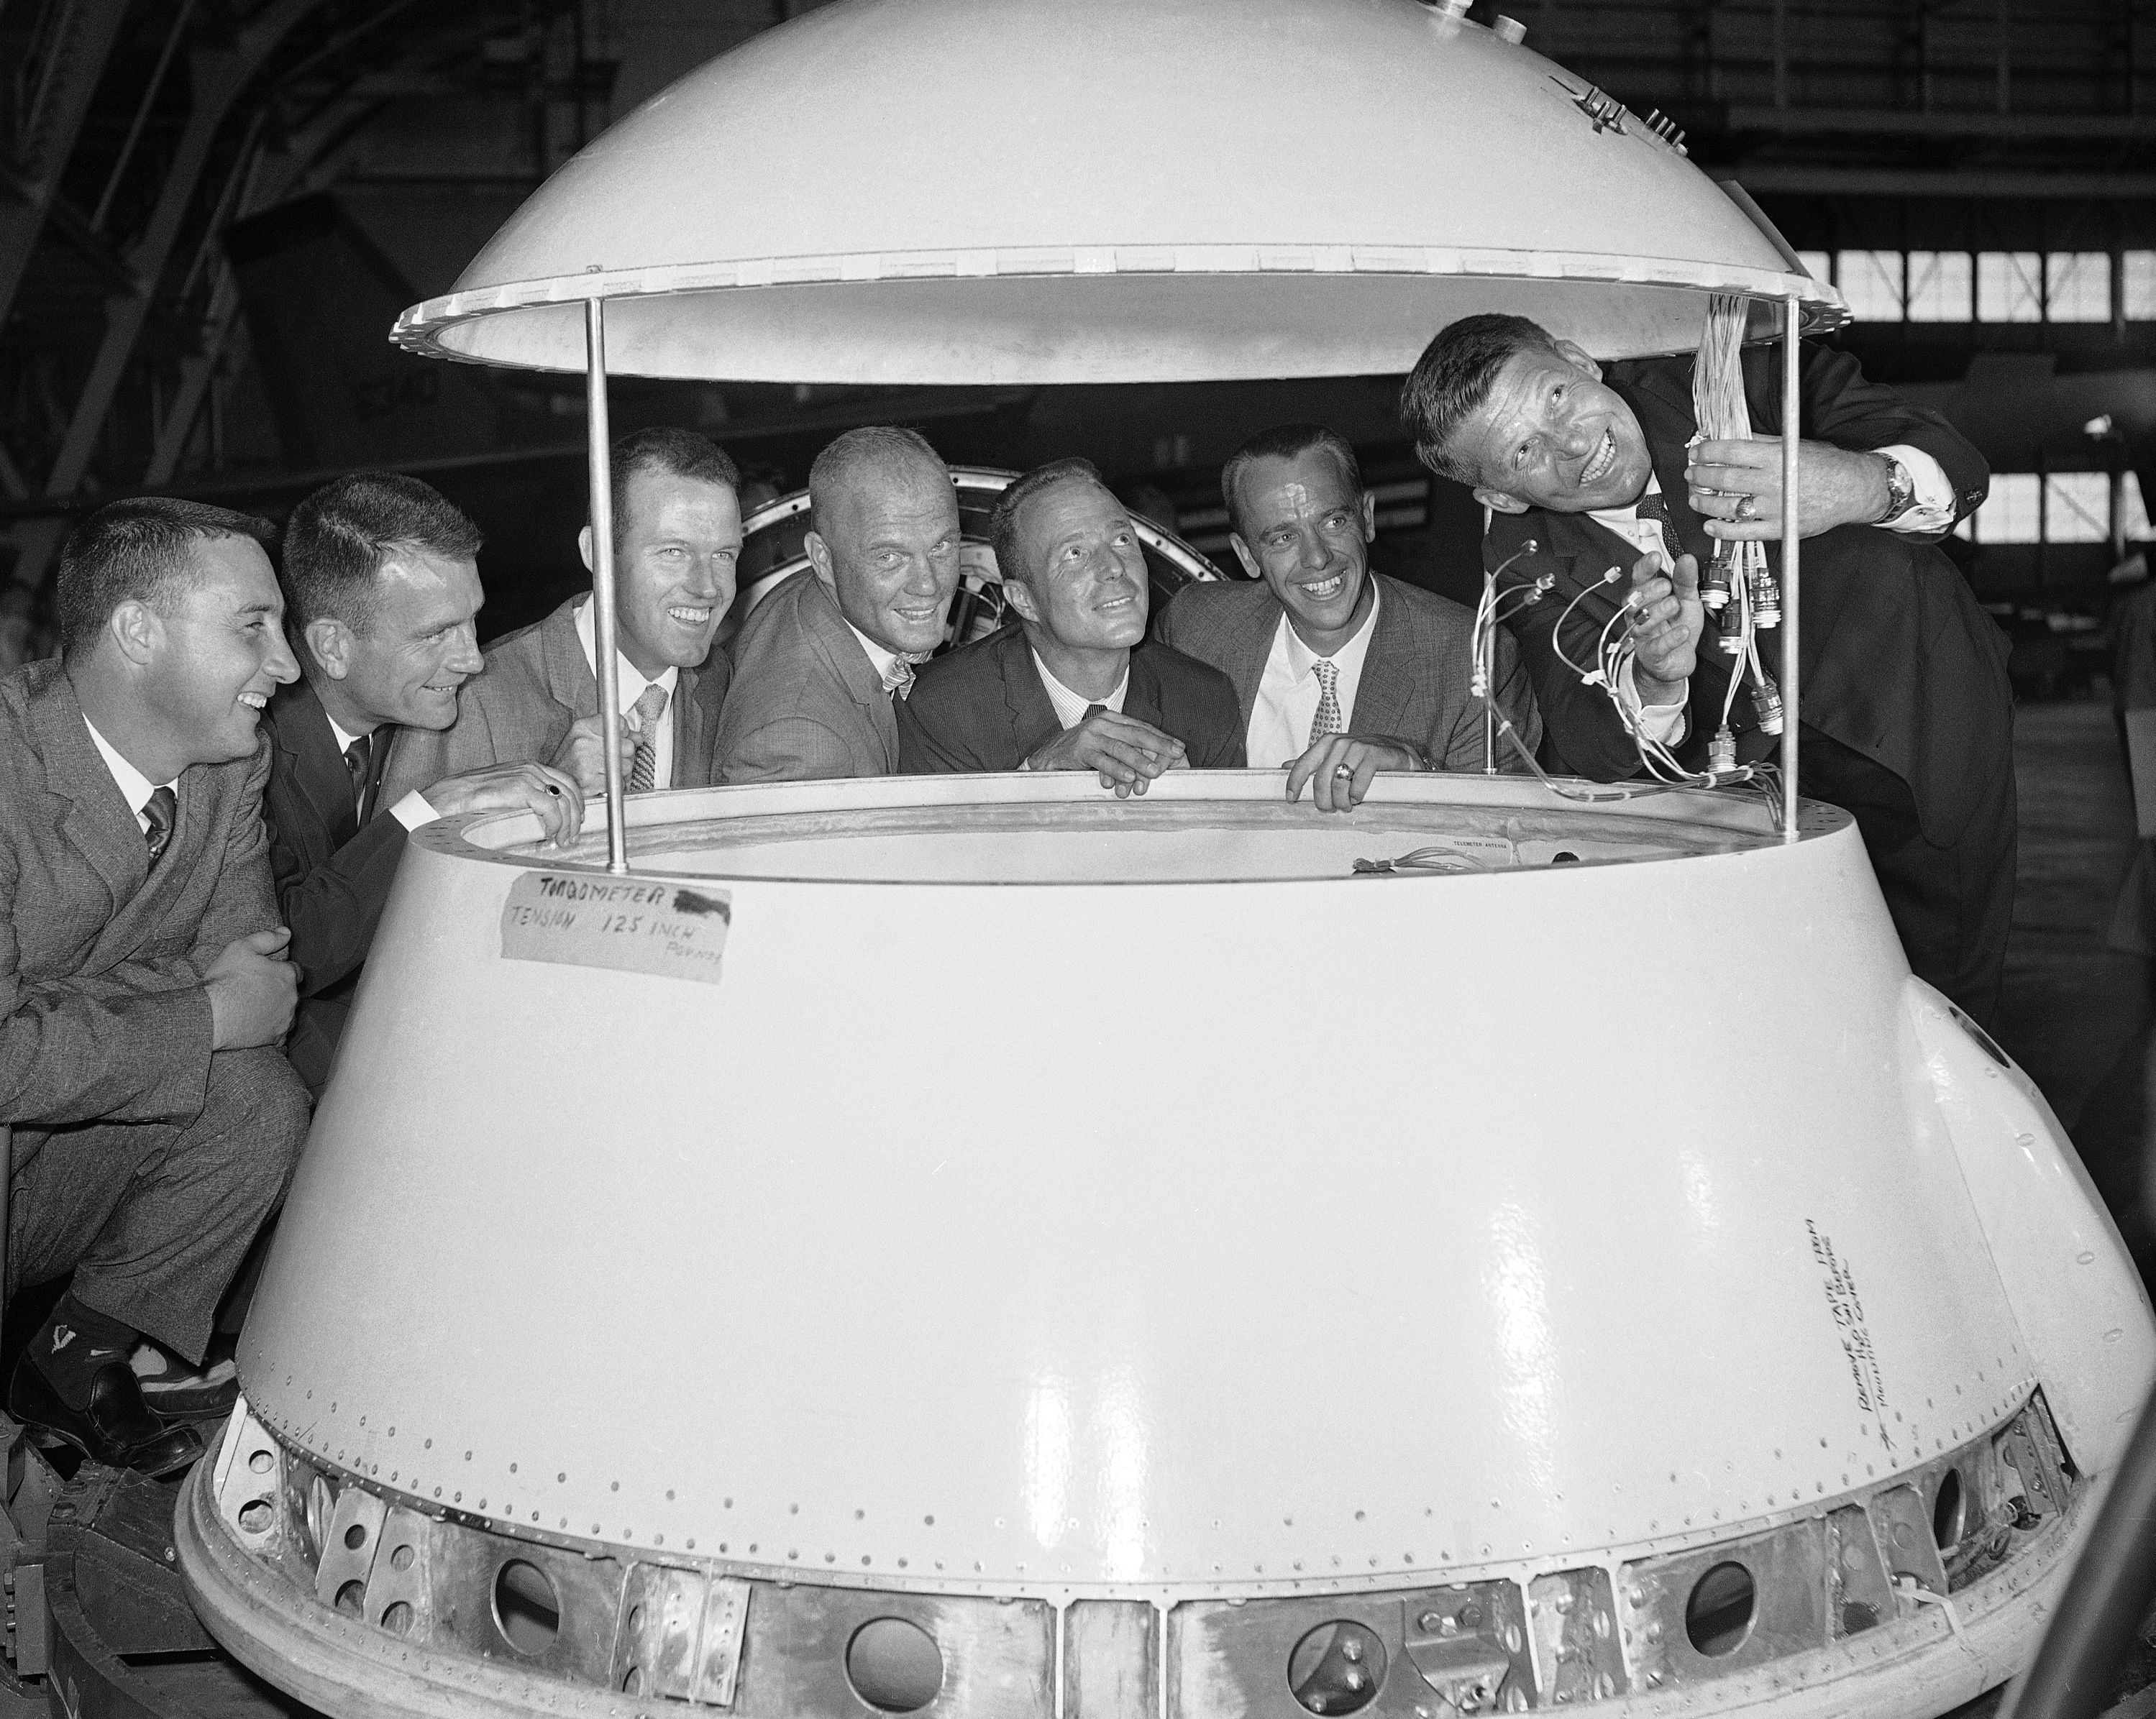 Seven astronauts in training at Langley Research Center, Va., pose on July 7, 1959, with a model of the capsule one of them may ride into space in 1961. From Left to right are Air force Capt. Virgil Grissom, Air Force Capt. Donald Slayton, Air Force Capt. Beroy Cooper, Marine Lt. Col. John Glenn, Navy Lt. Malcolm Carpenter, Navy Lt. Cmdr. Alan Shapard and Navy Lt. Cmdr. Walter Schirra. (AP Photo/CPG)